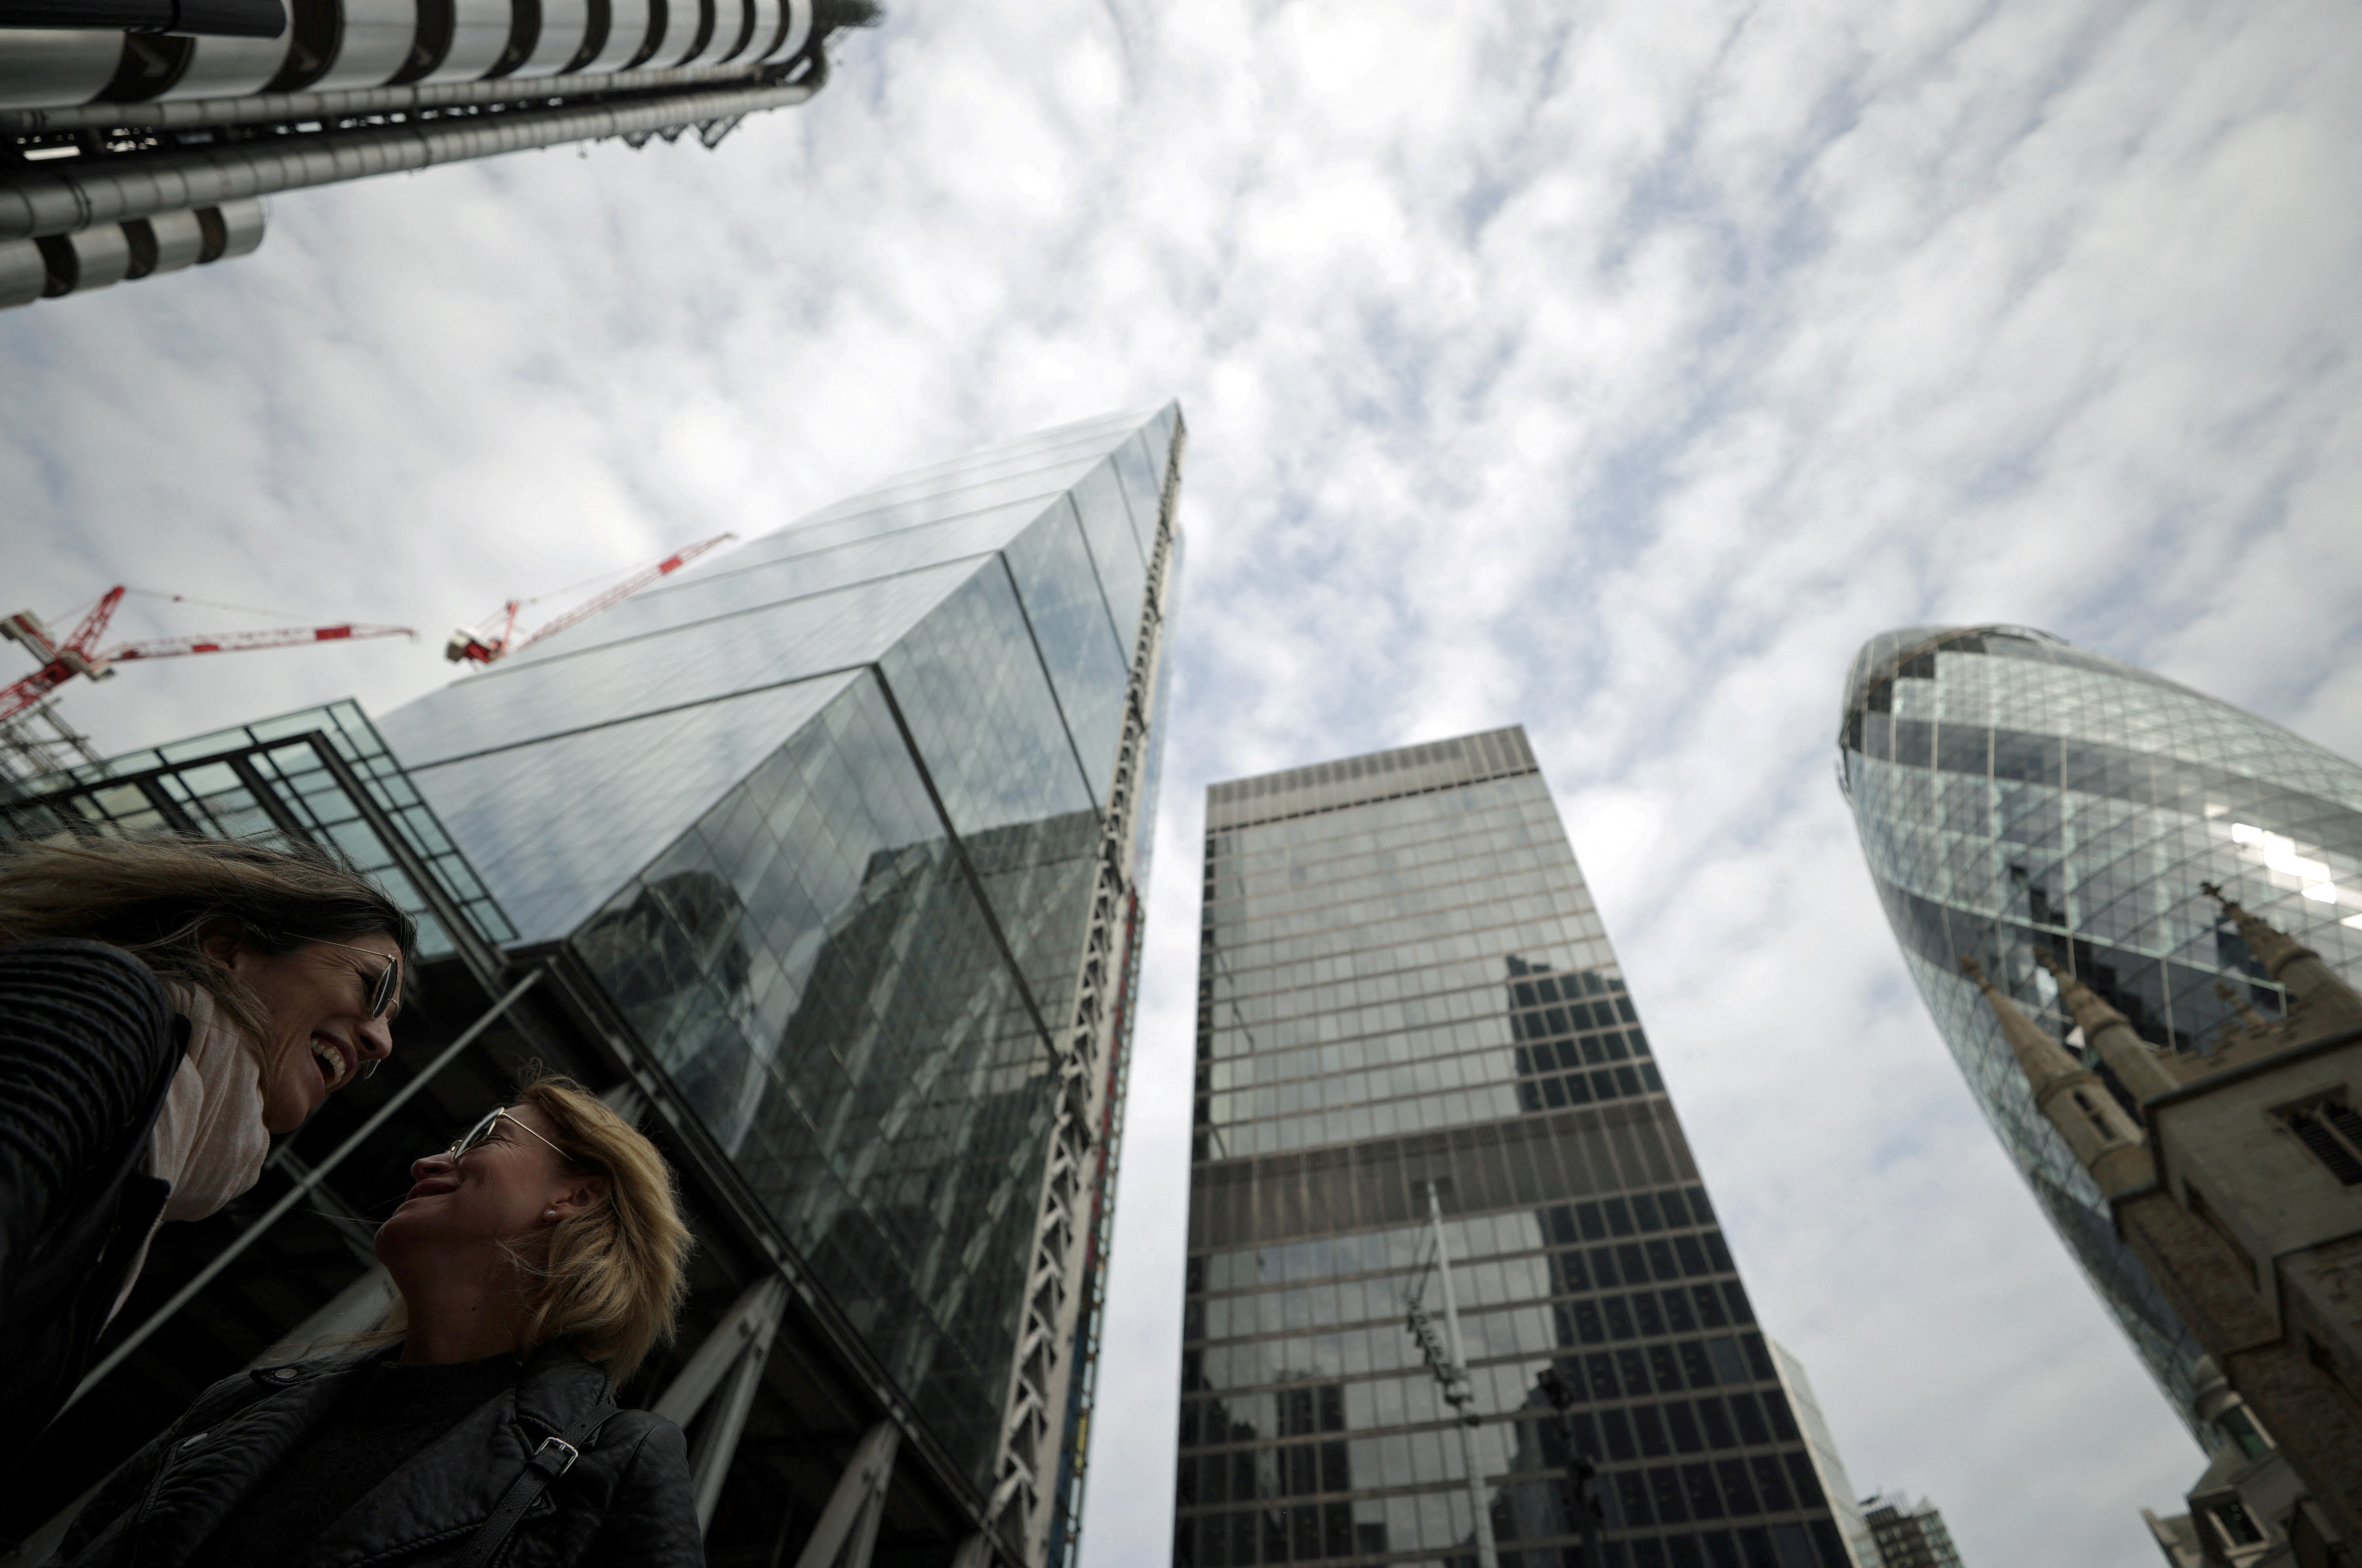 People walk through the City of London financial district in London